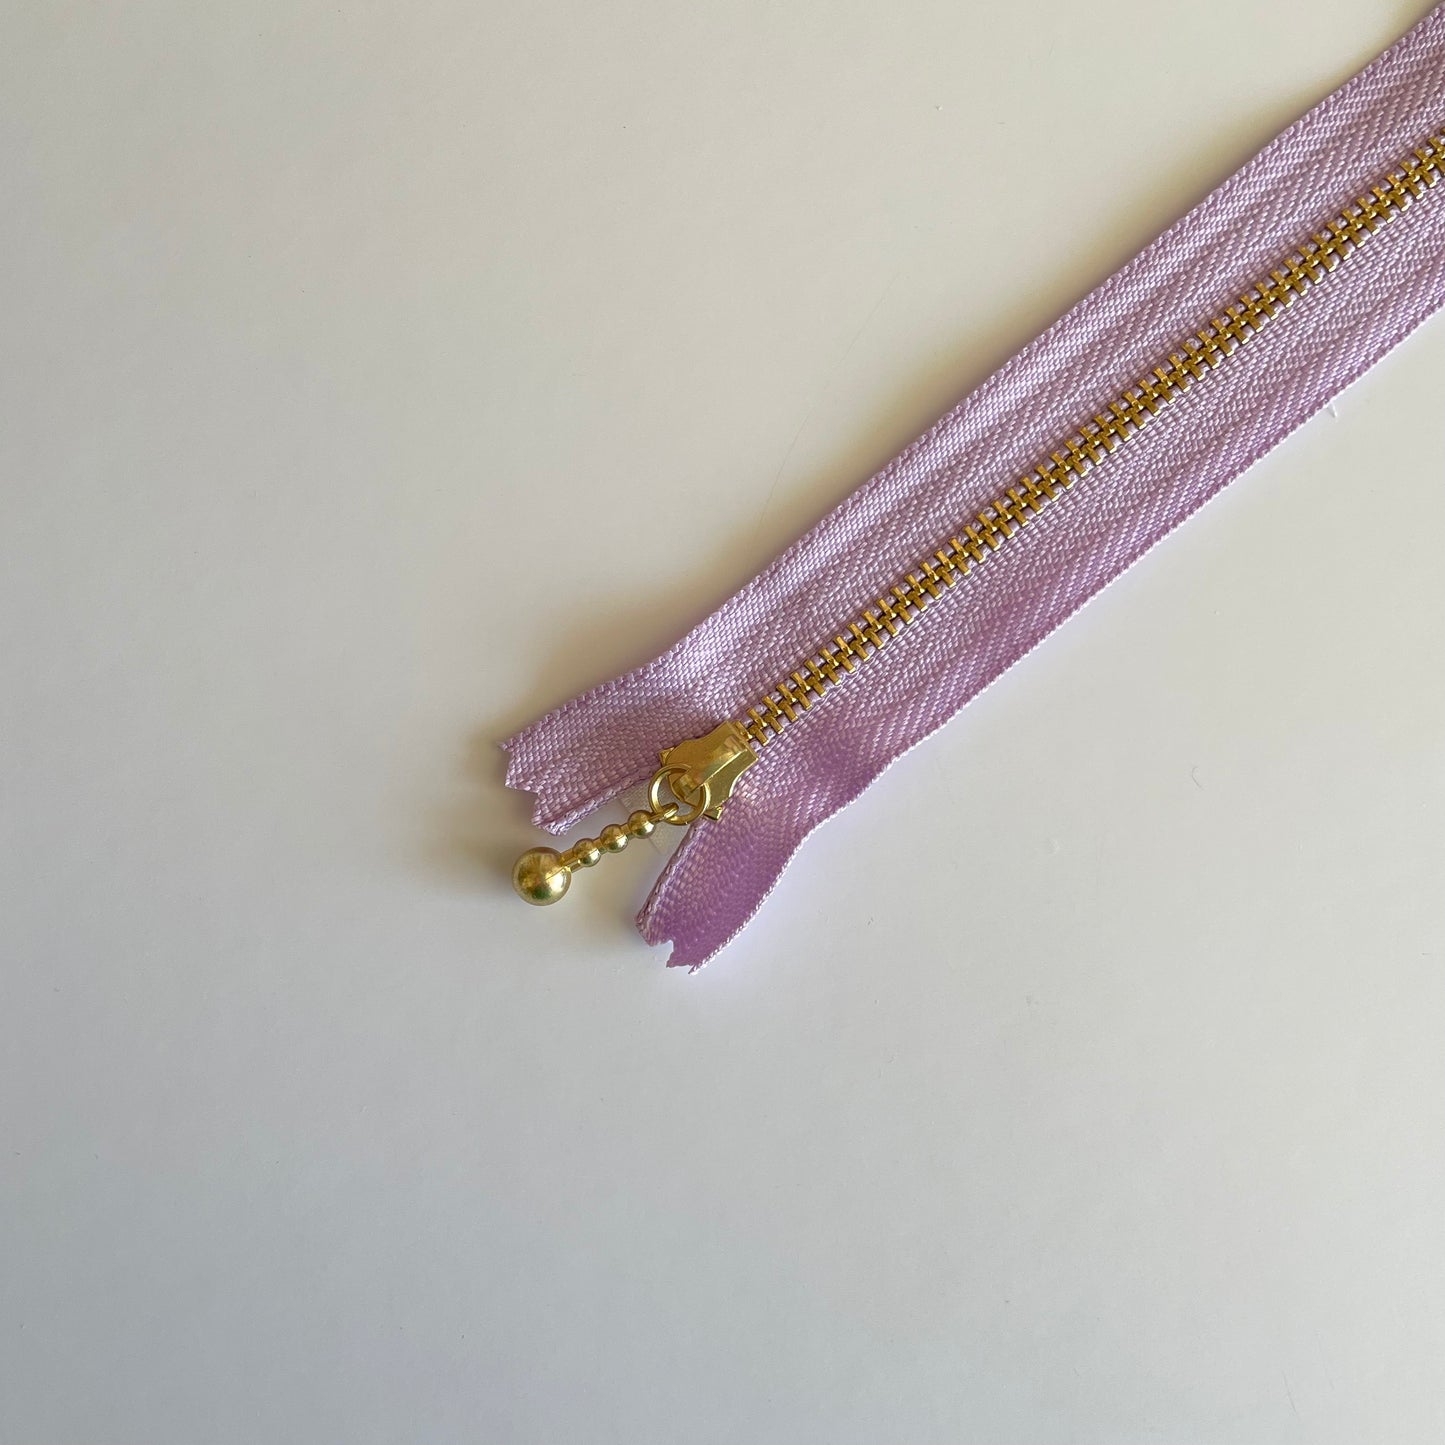 YKK Metalic Zippers with Water-drop Pull - Lilac (8"-20CM)